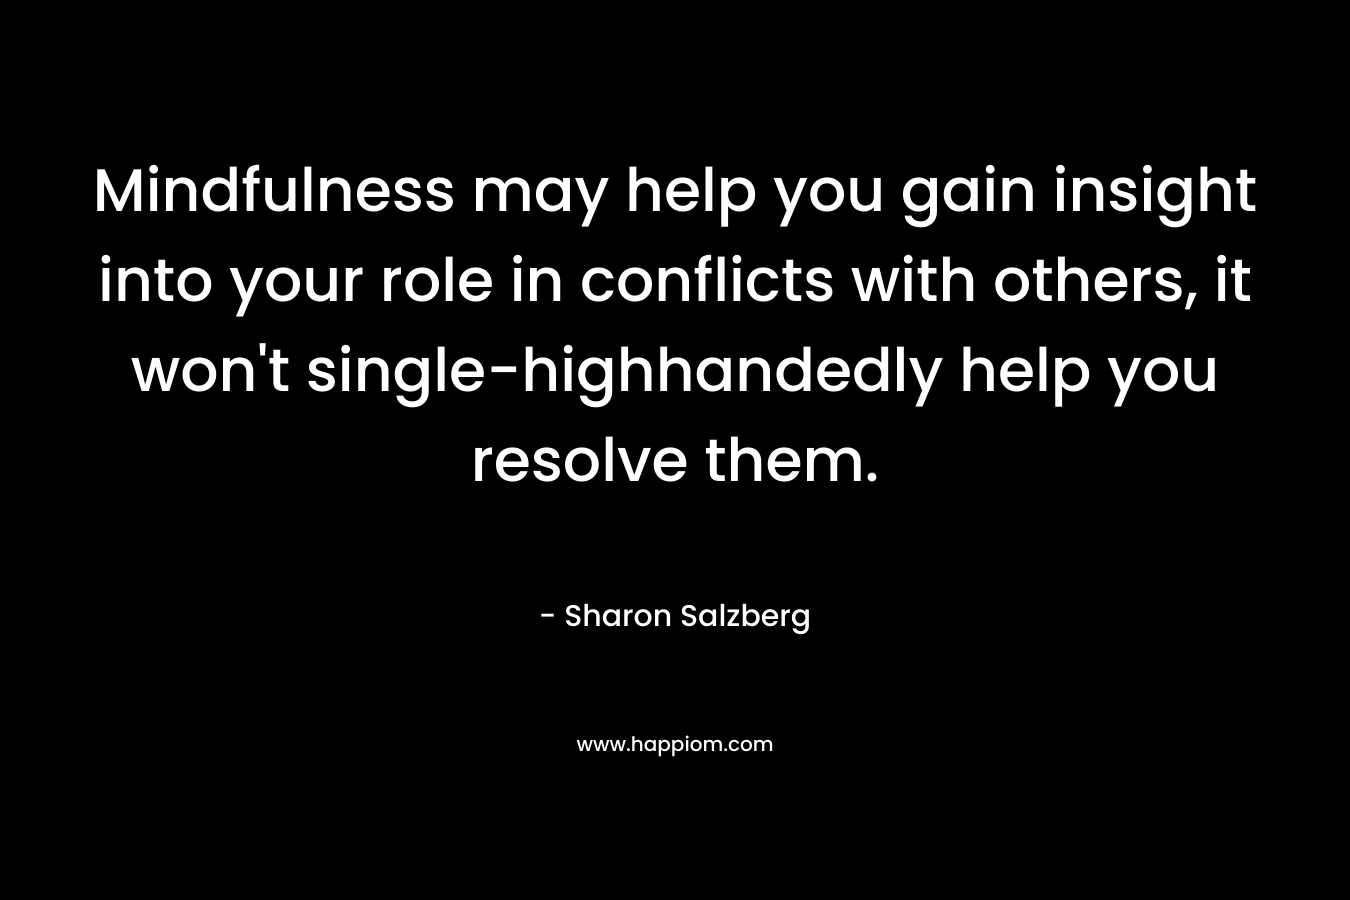 Mindfulness may help you gain insight into your role in conflicts with others, it won't single-highhandedly help you resolve them.